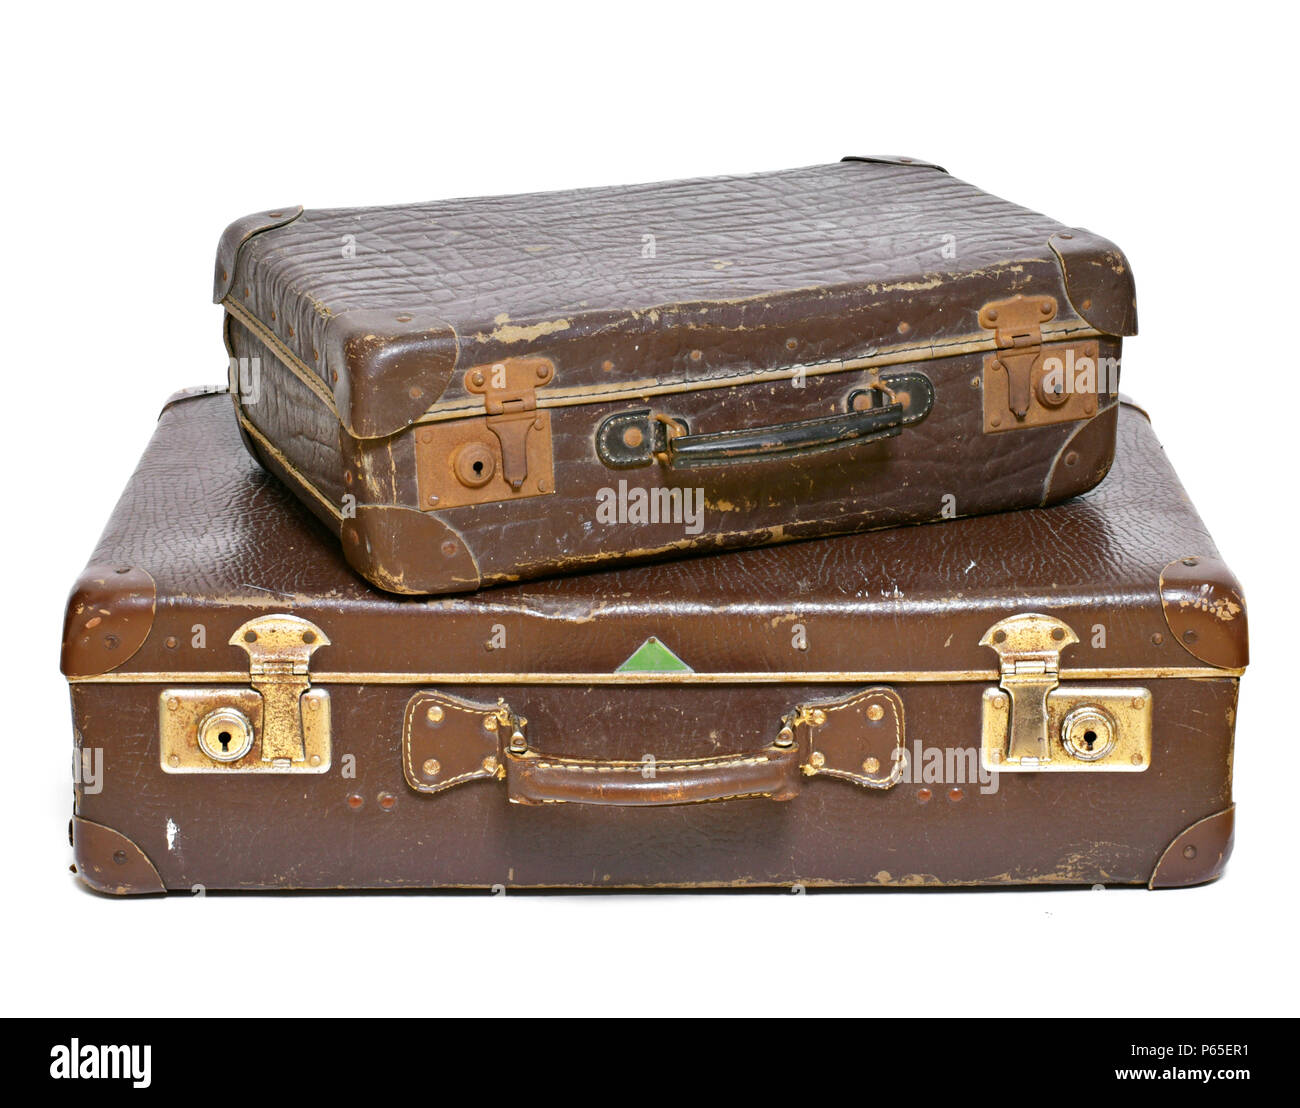 Old suitcases, travel items, luggage or baggage. Vintage suitcases, retro,  leather suitcases, isolated on white background Stock Photo - Alamy